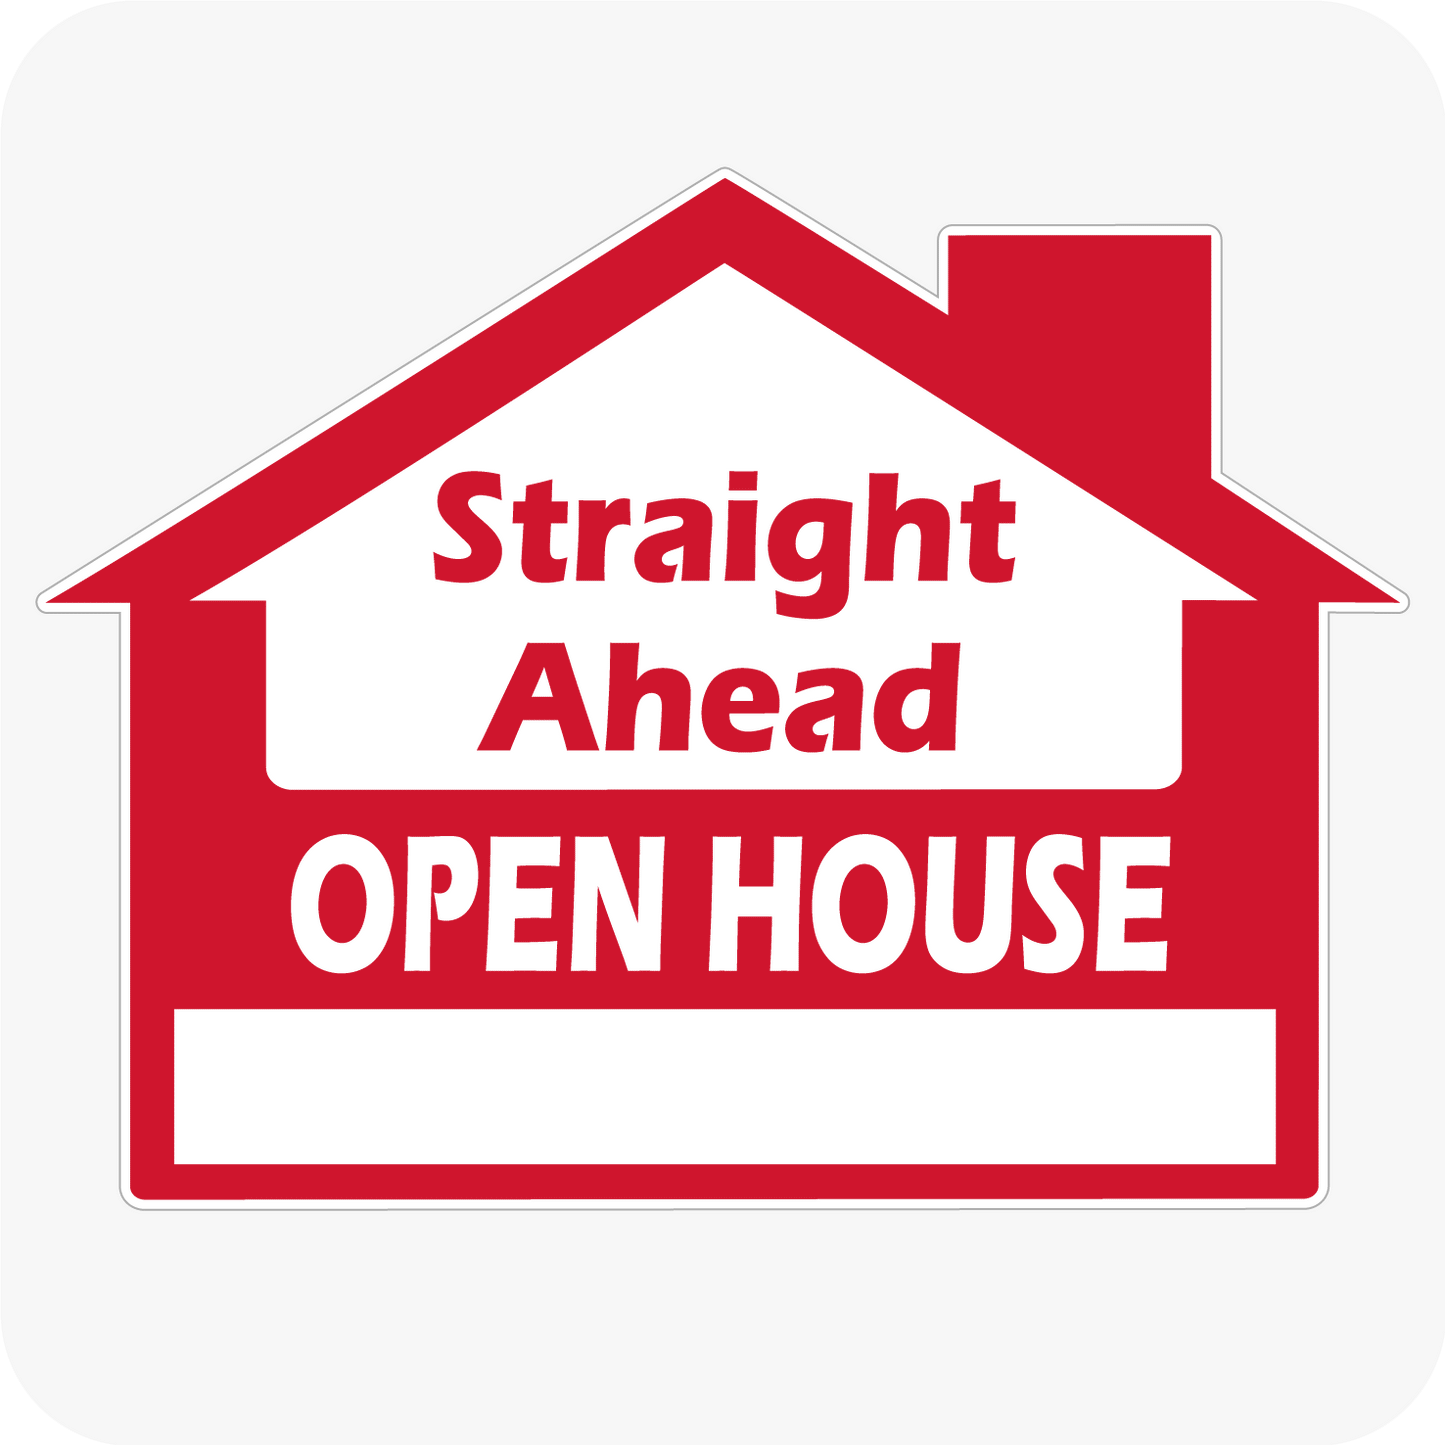 Straight Ahead Open House - House Shaped Sign 18 x 24 - Red